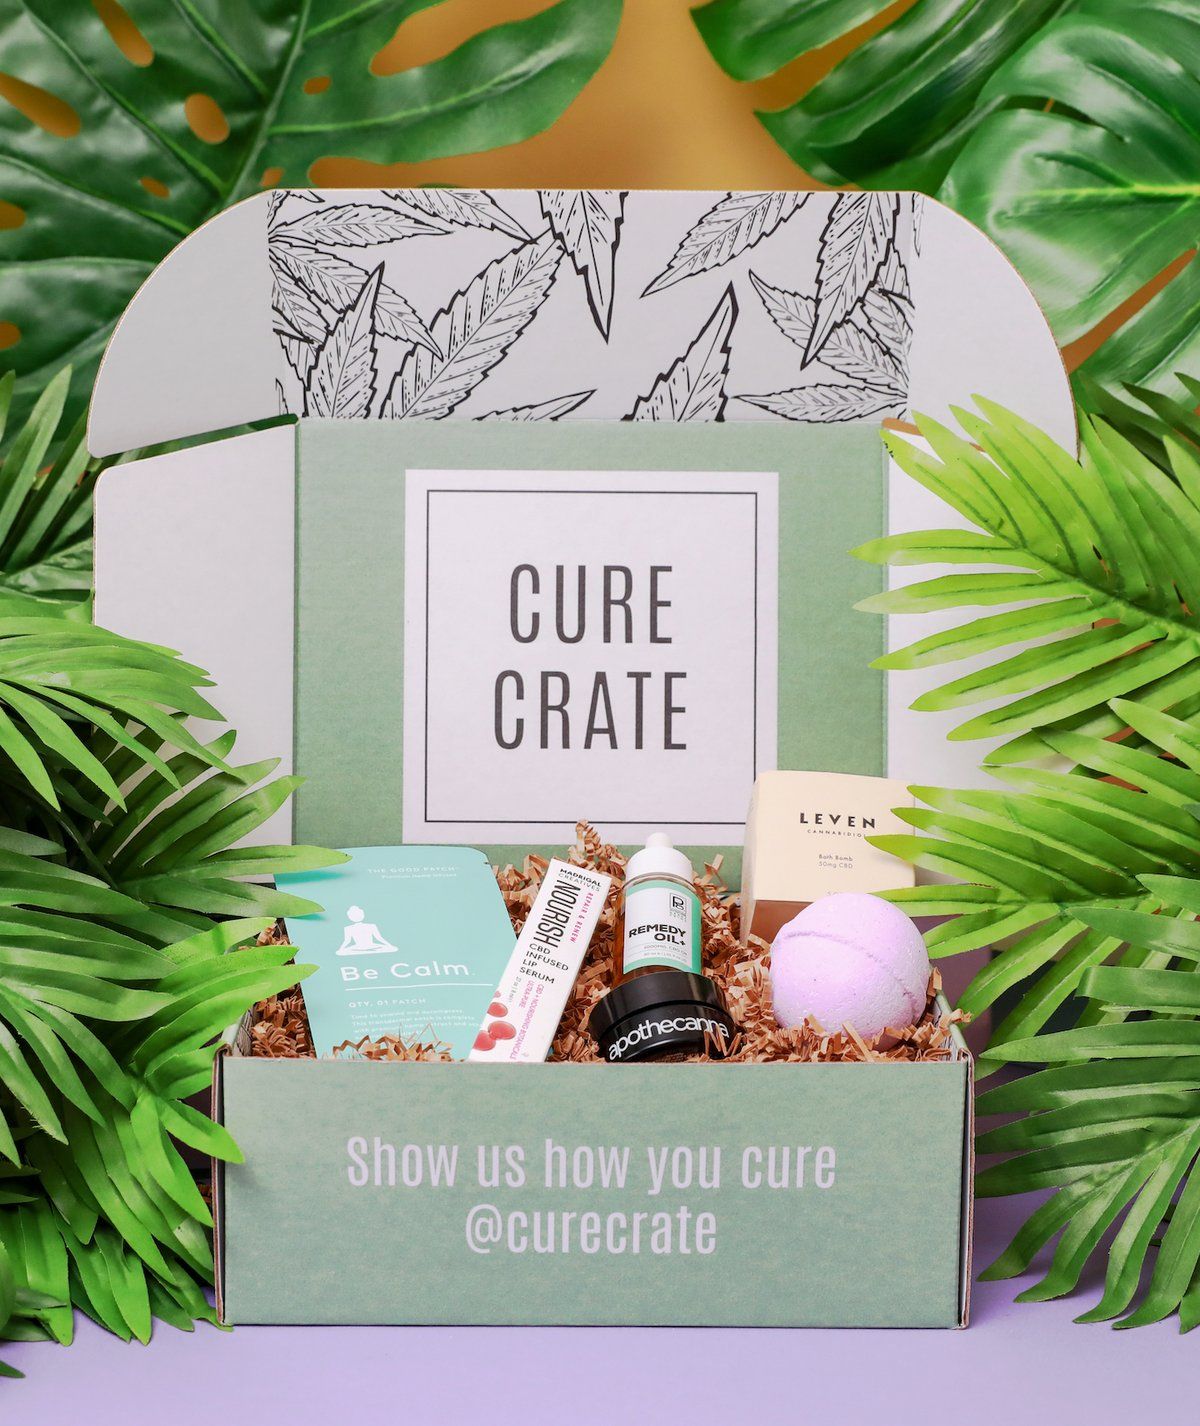 Cure Crate CBD subscription box delivers the goods (and good) in the cannabis industry